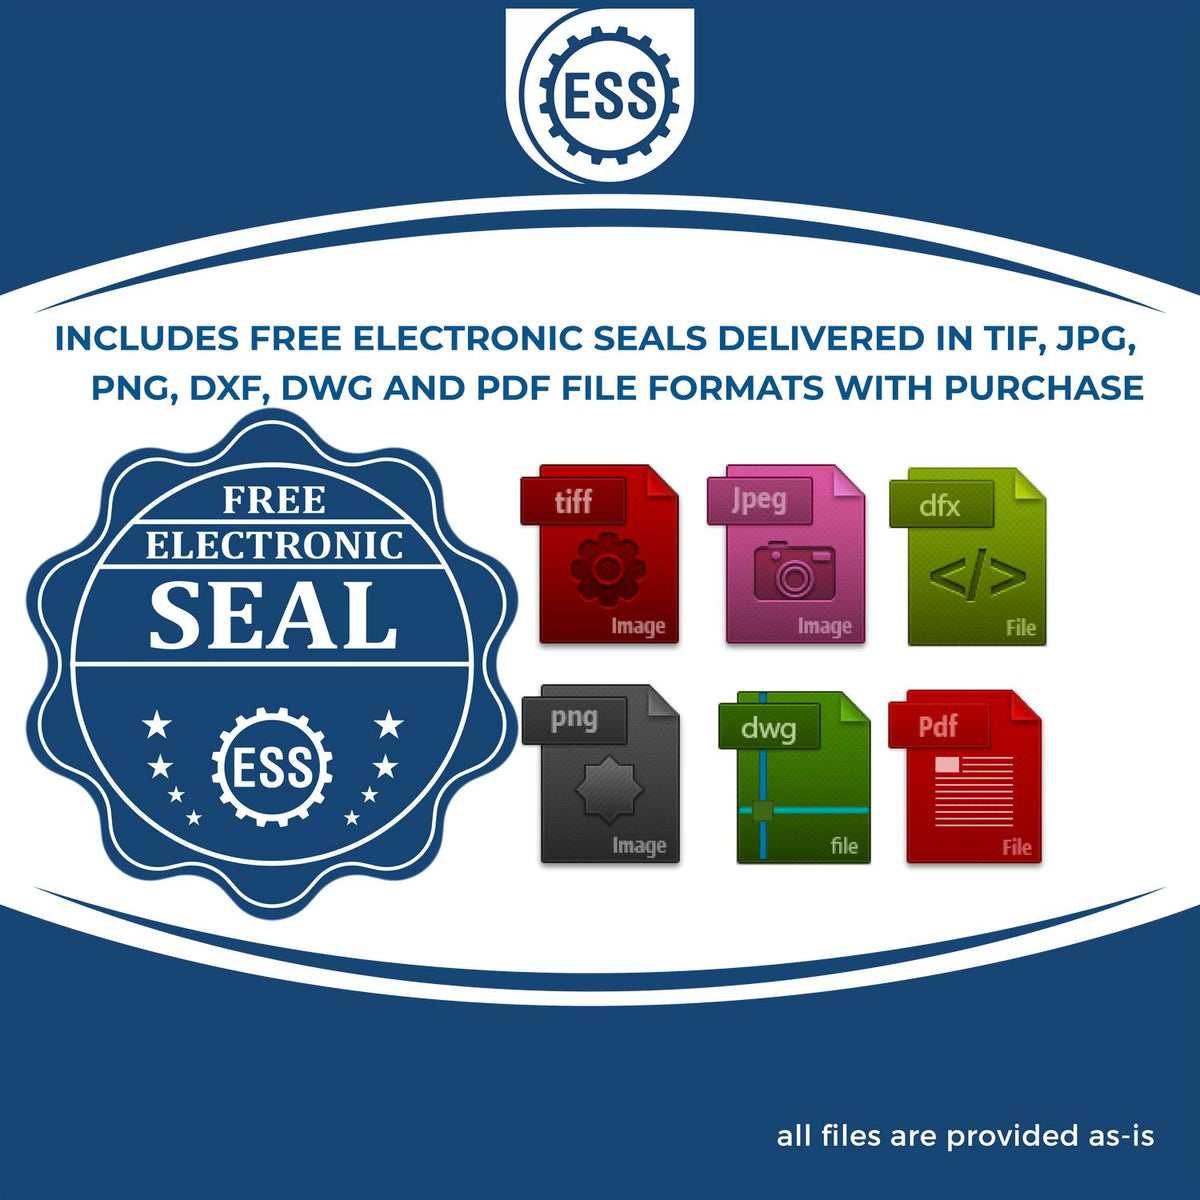 An infographic for the free electronic seal for the Long Reach Connecticut PE Seal illustrating the different file type icons such as DXF, DWG, TIF, JPG and PNG.